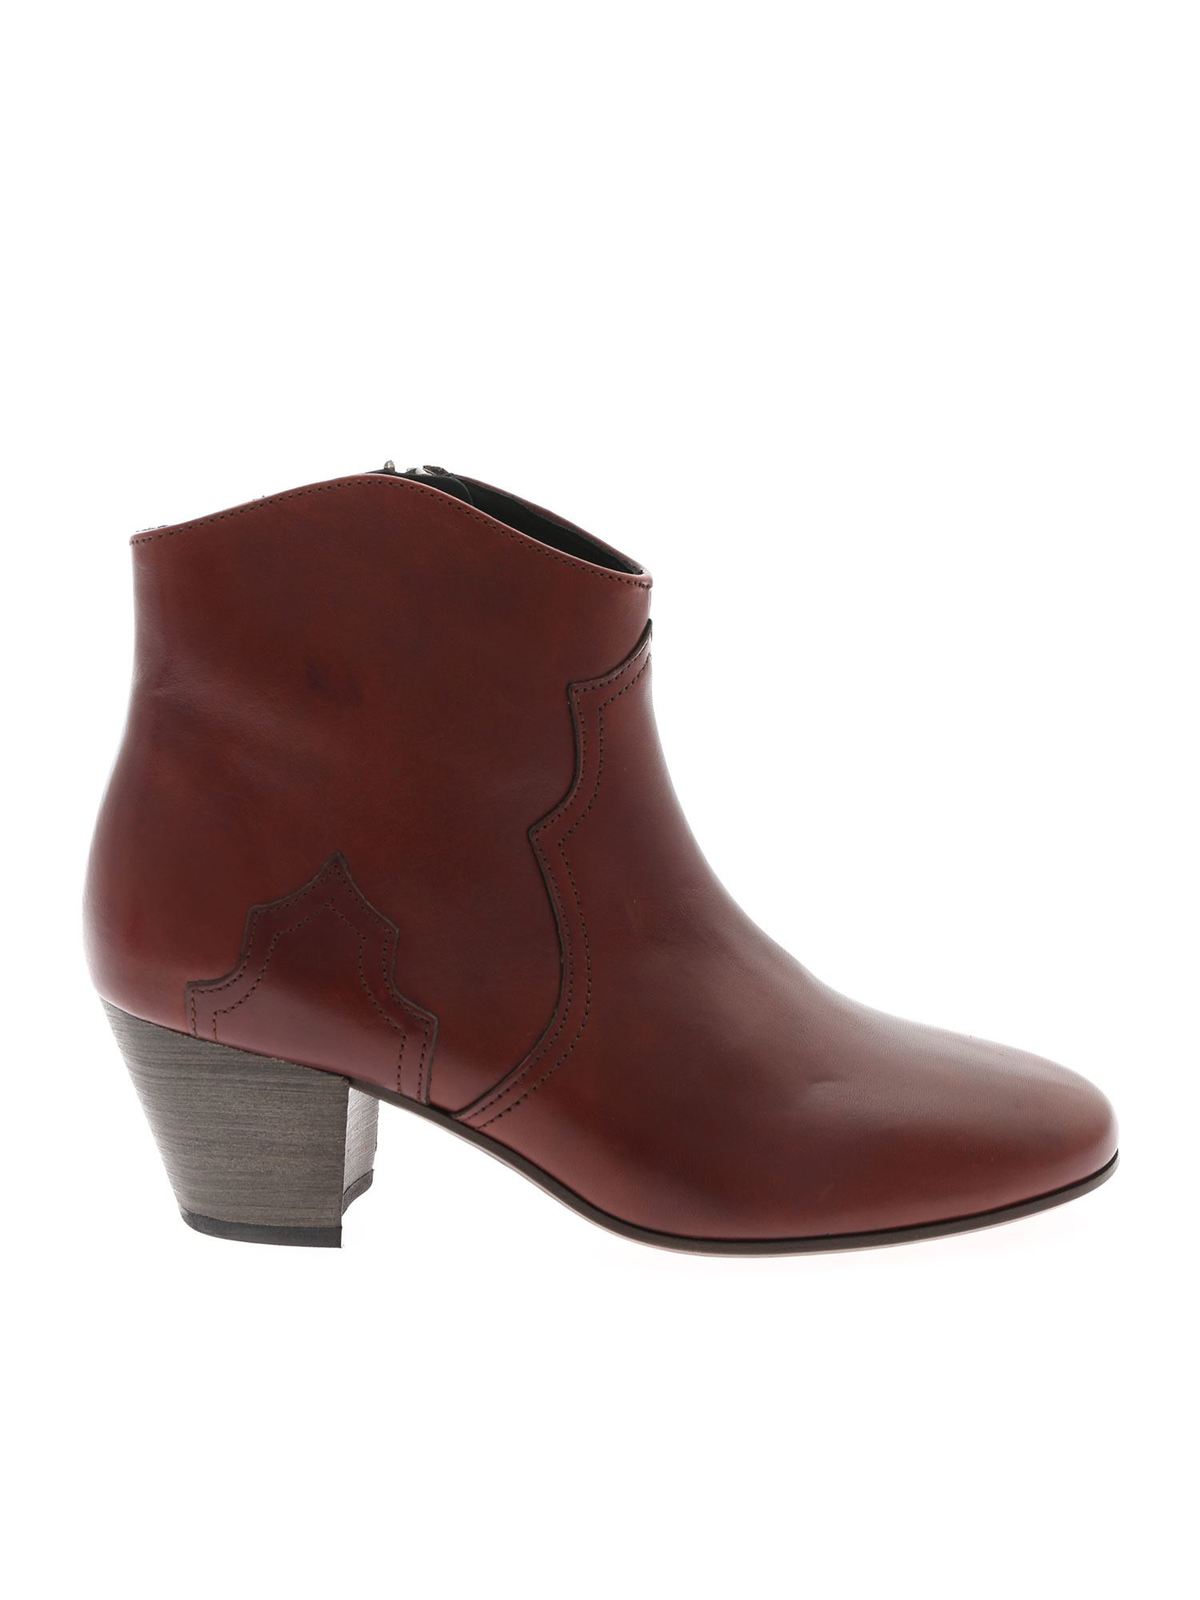 ISABEL MARANT DICKER ANKLE BOOTS IN BRICK COLOR